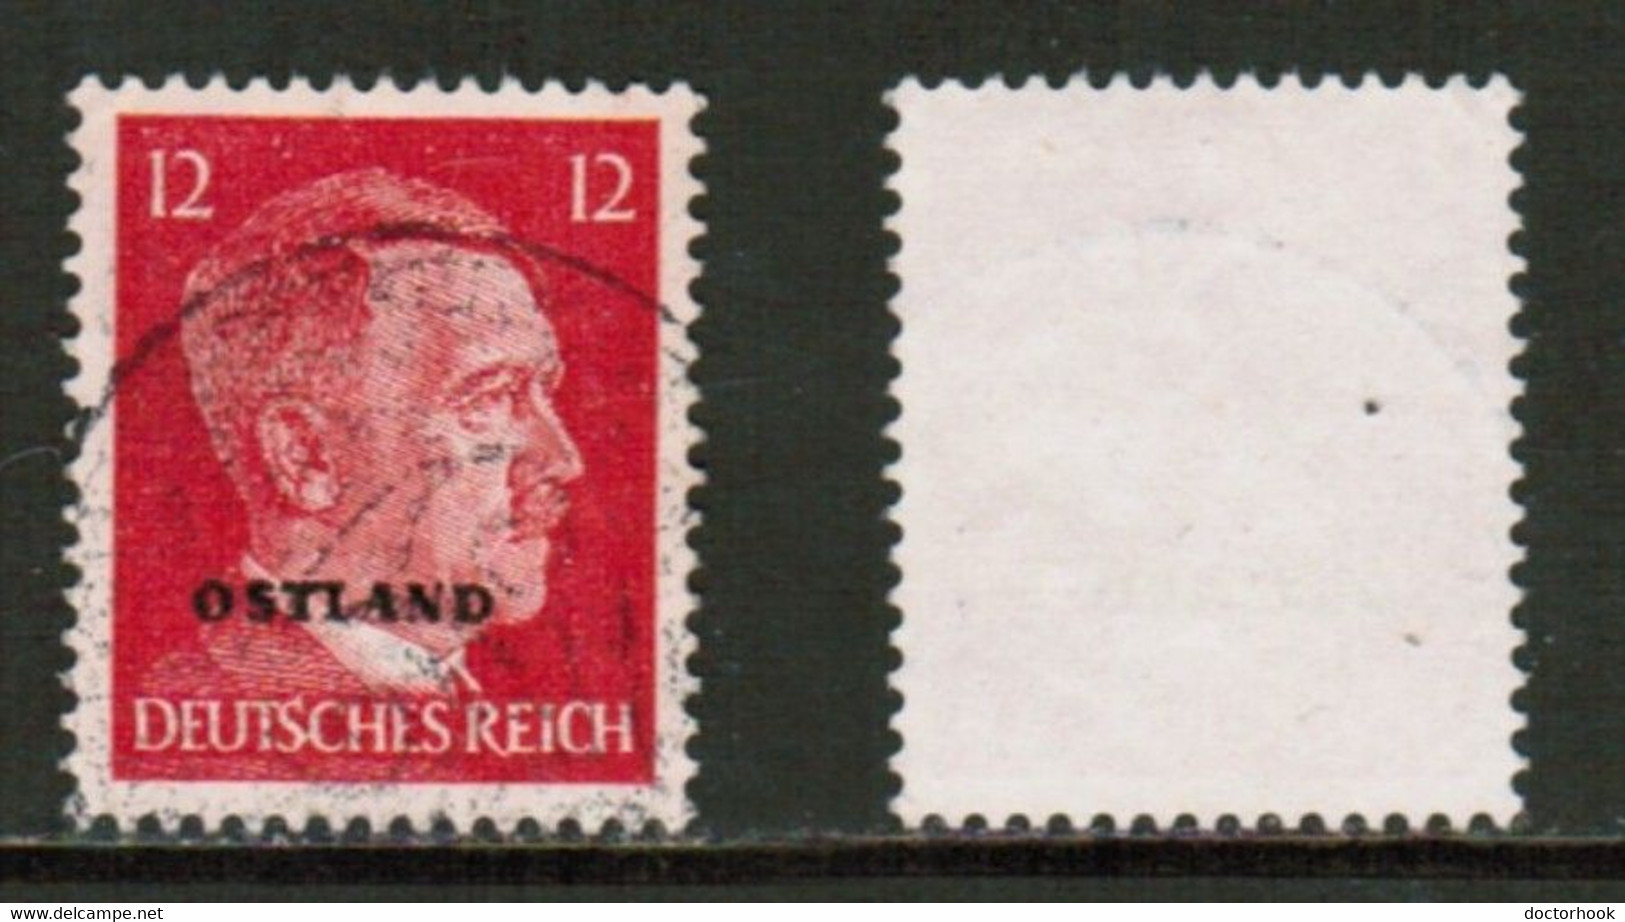 RUSSIA---German Occupation   Scott # N 16 USED (CONDITION AS PER SCAN) (Stamp Scan # 847-6) - 1941-43 Occupation: Germany